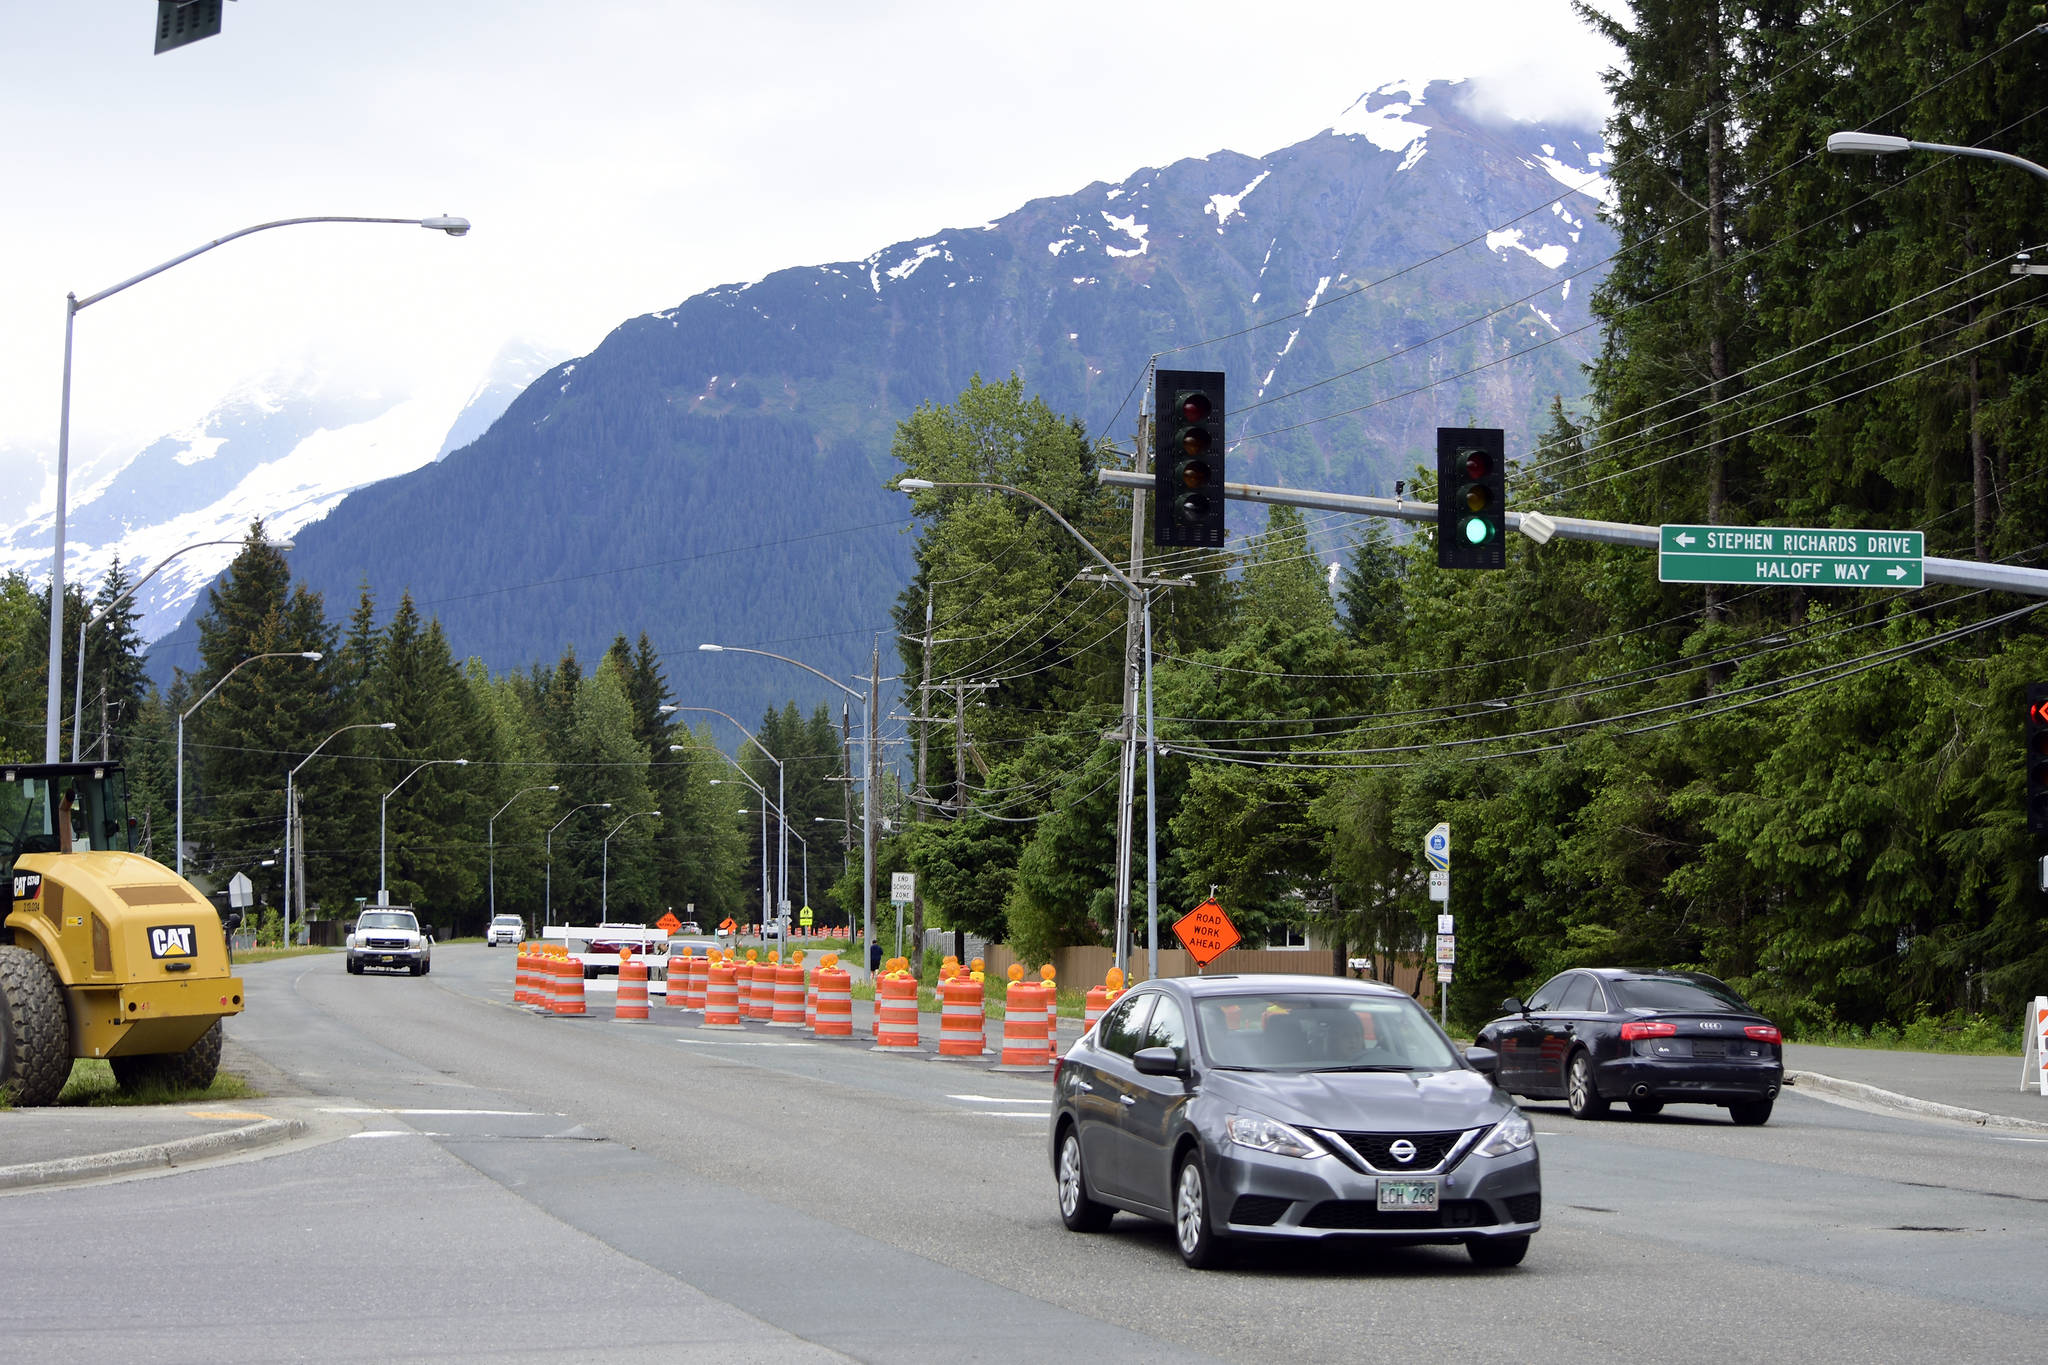 Construction takes place at Mendenhall Loop Road and Stephen Richards Memorial Drive on Monday, June 9, 2020. Work on the roundabouts is expected to be completed by September. (Peter Segall | Juneau Empire)